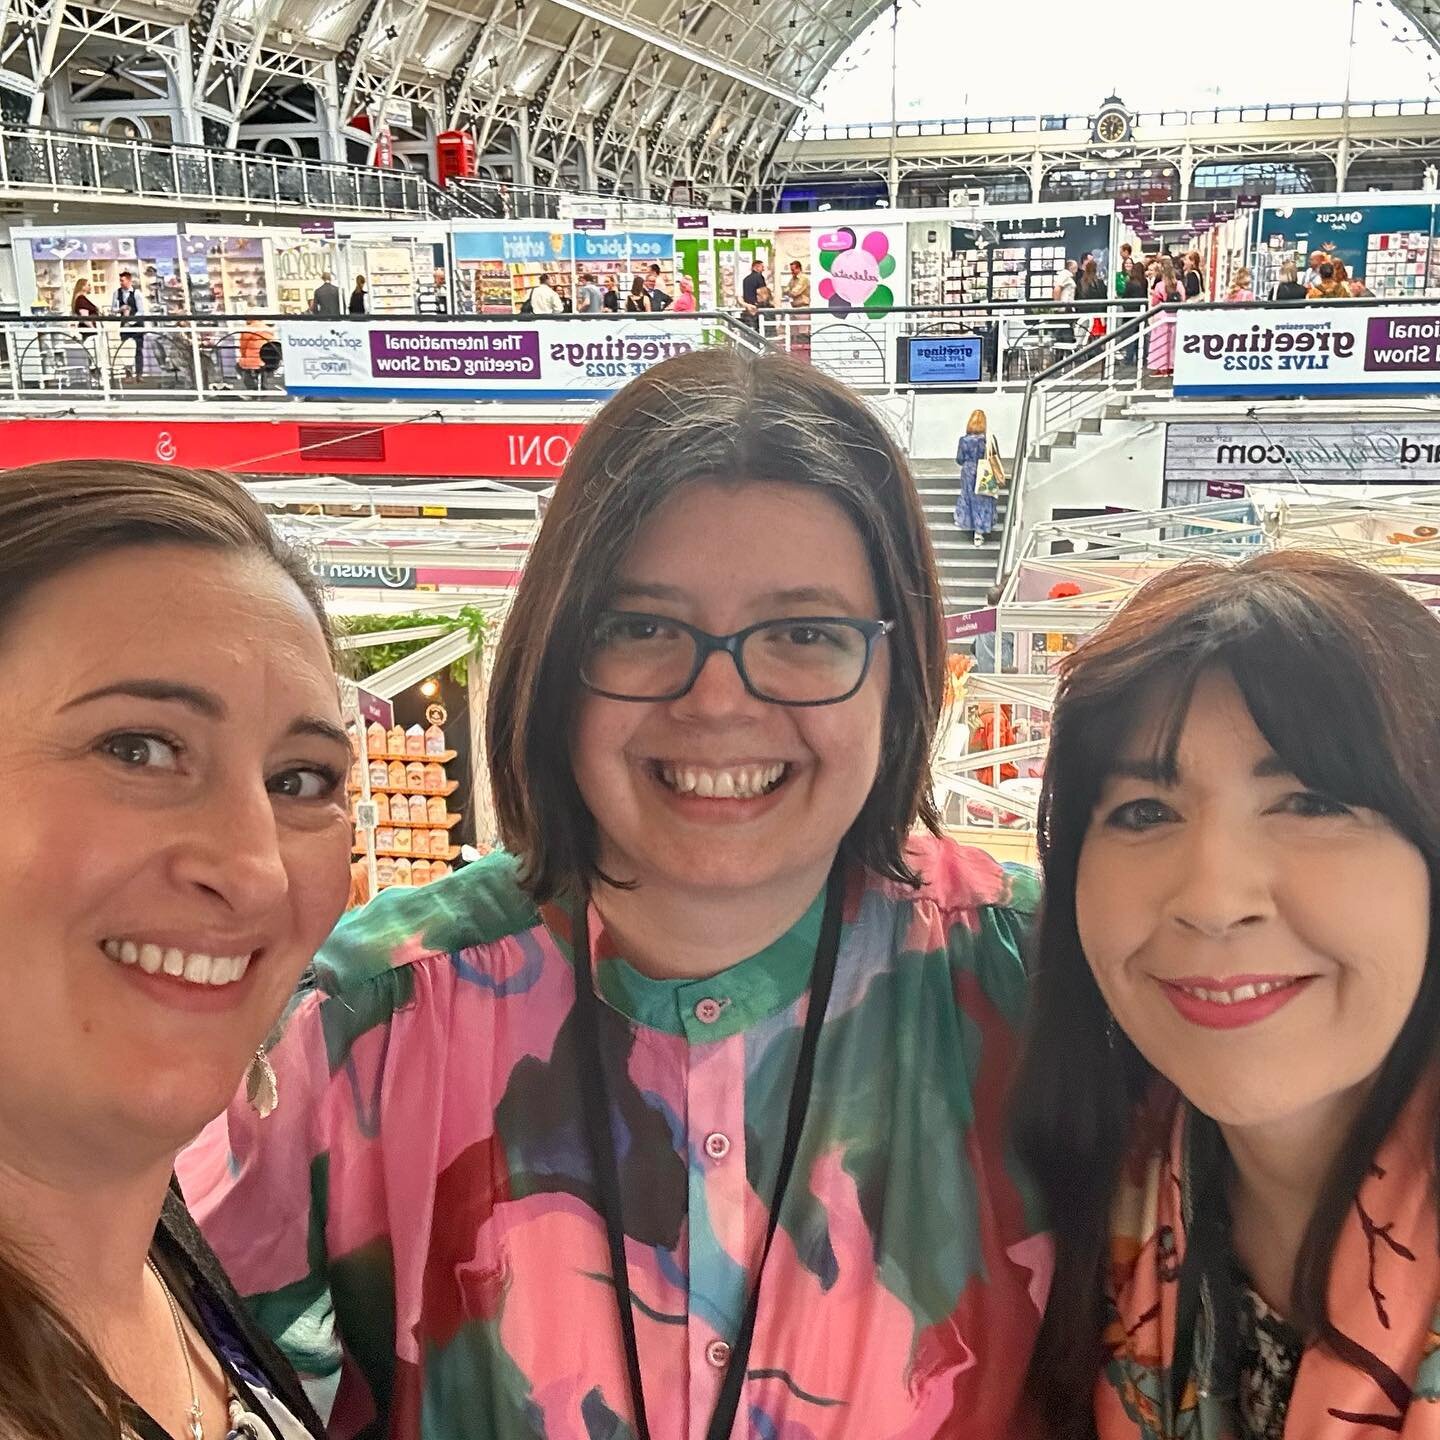 Today was just magic ✨ My first visit to @pglivelondon and meeting up in real life with @cassandrarileydesigns @northernbirddesigns @wickierowlandillustration @jehane_ltd @rob_sollom @beales.richard 
So amazing not to have a computer screen between u